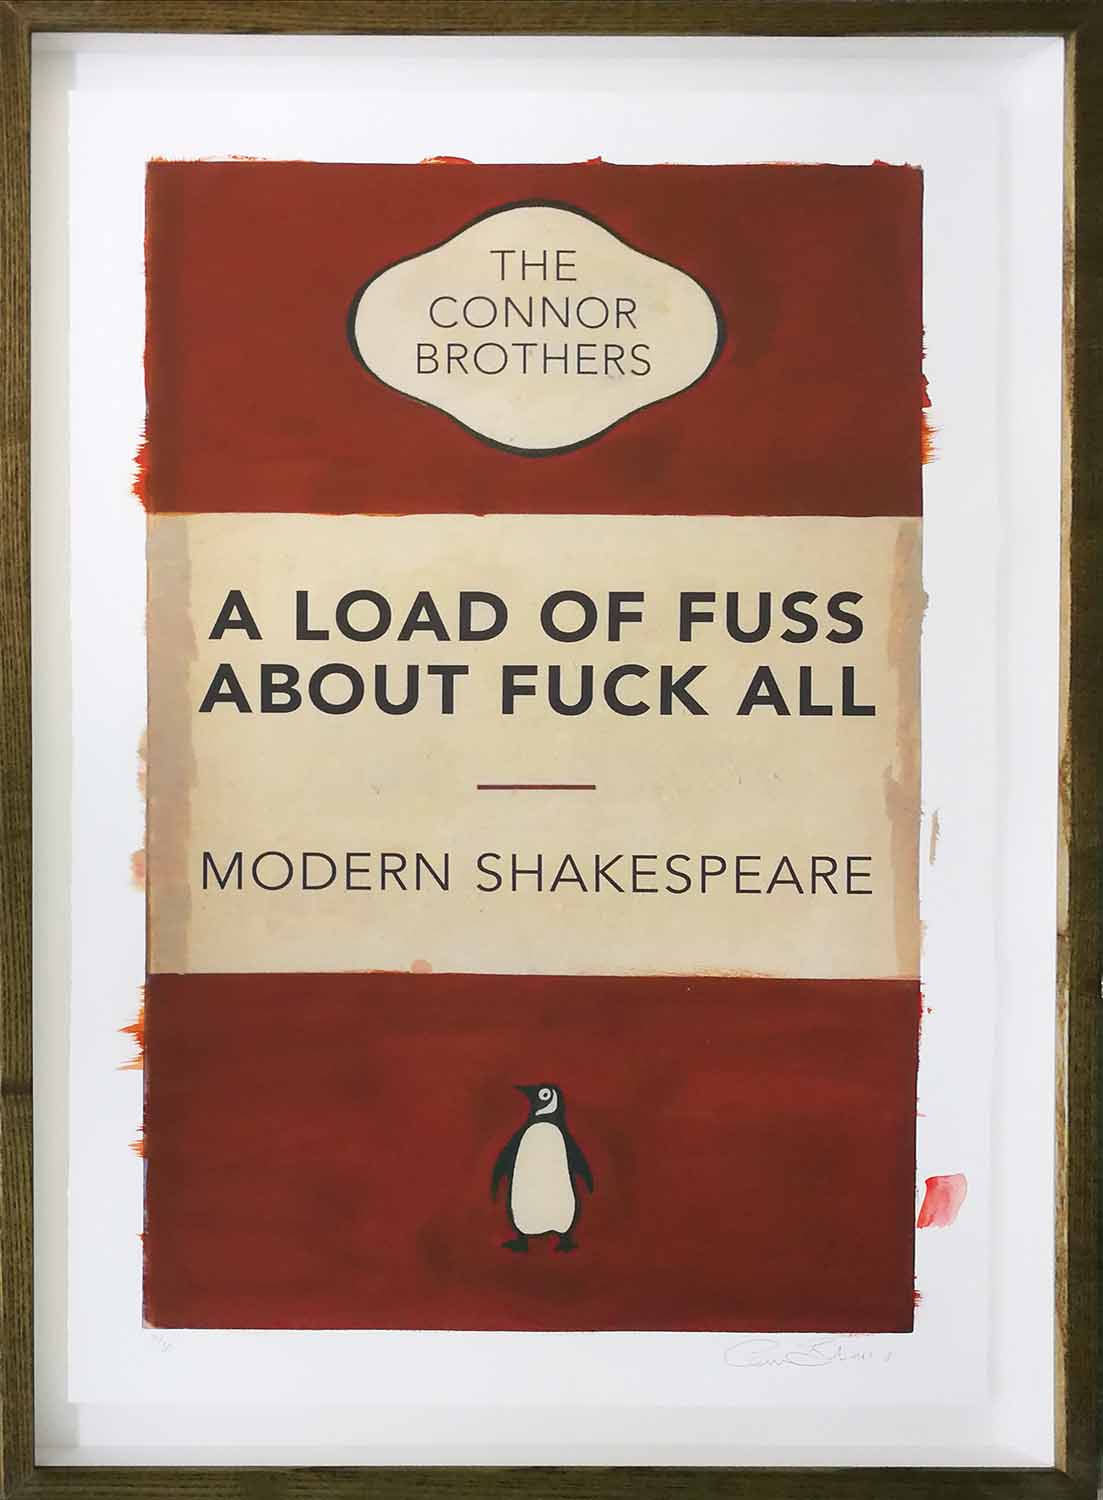 THE CONNOR BROTHERS 'A Load of Fuss', 2018, screen print, - Image 2 of 7